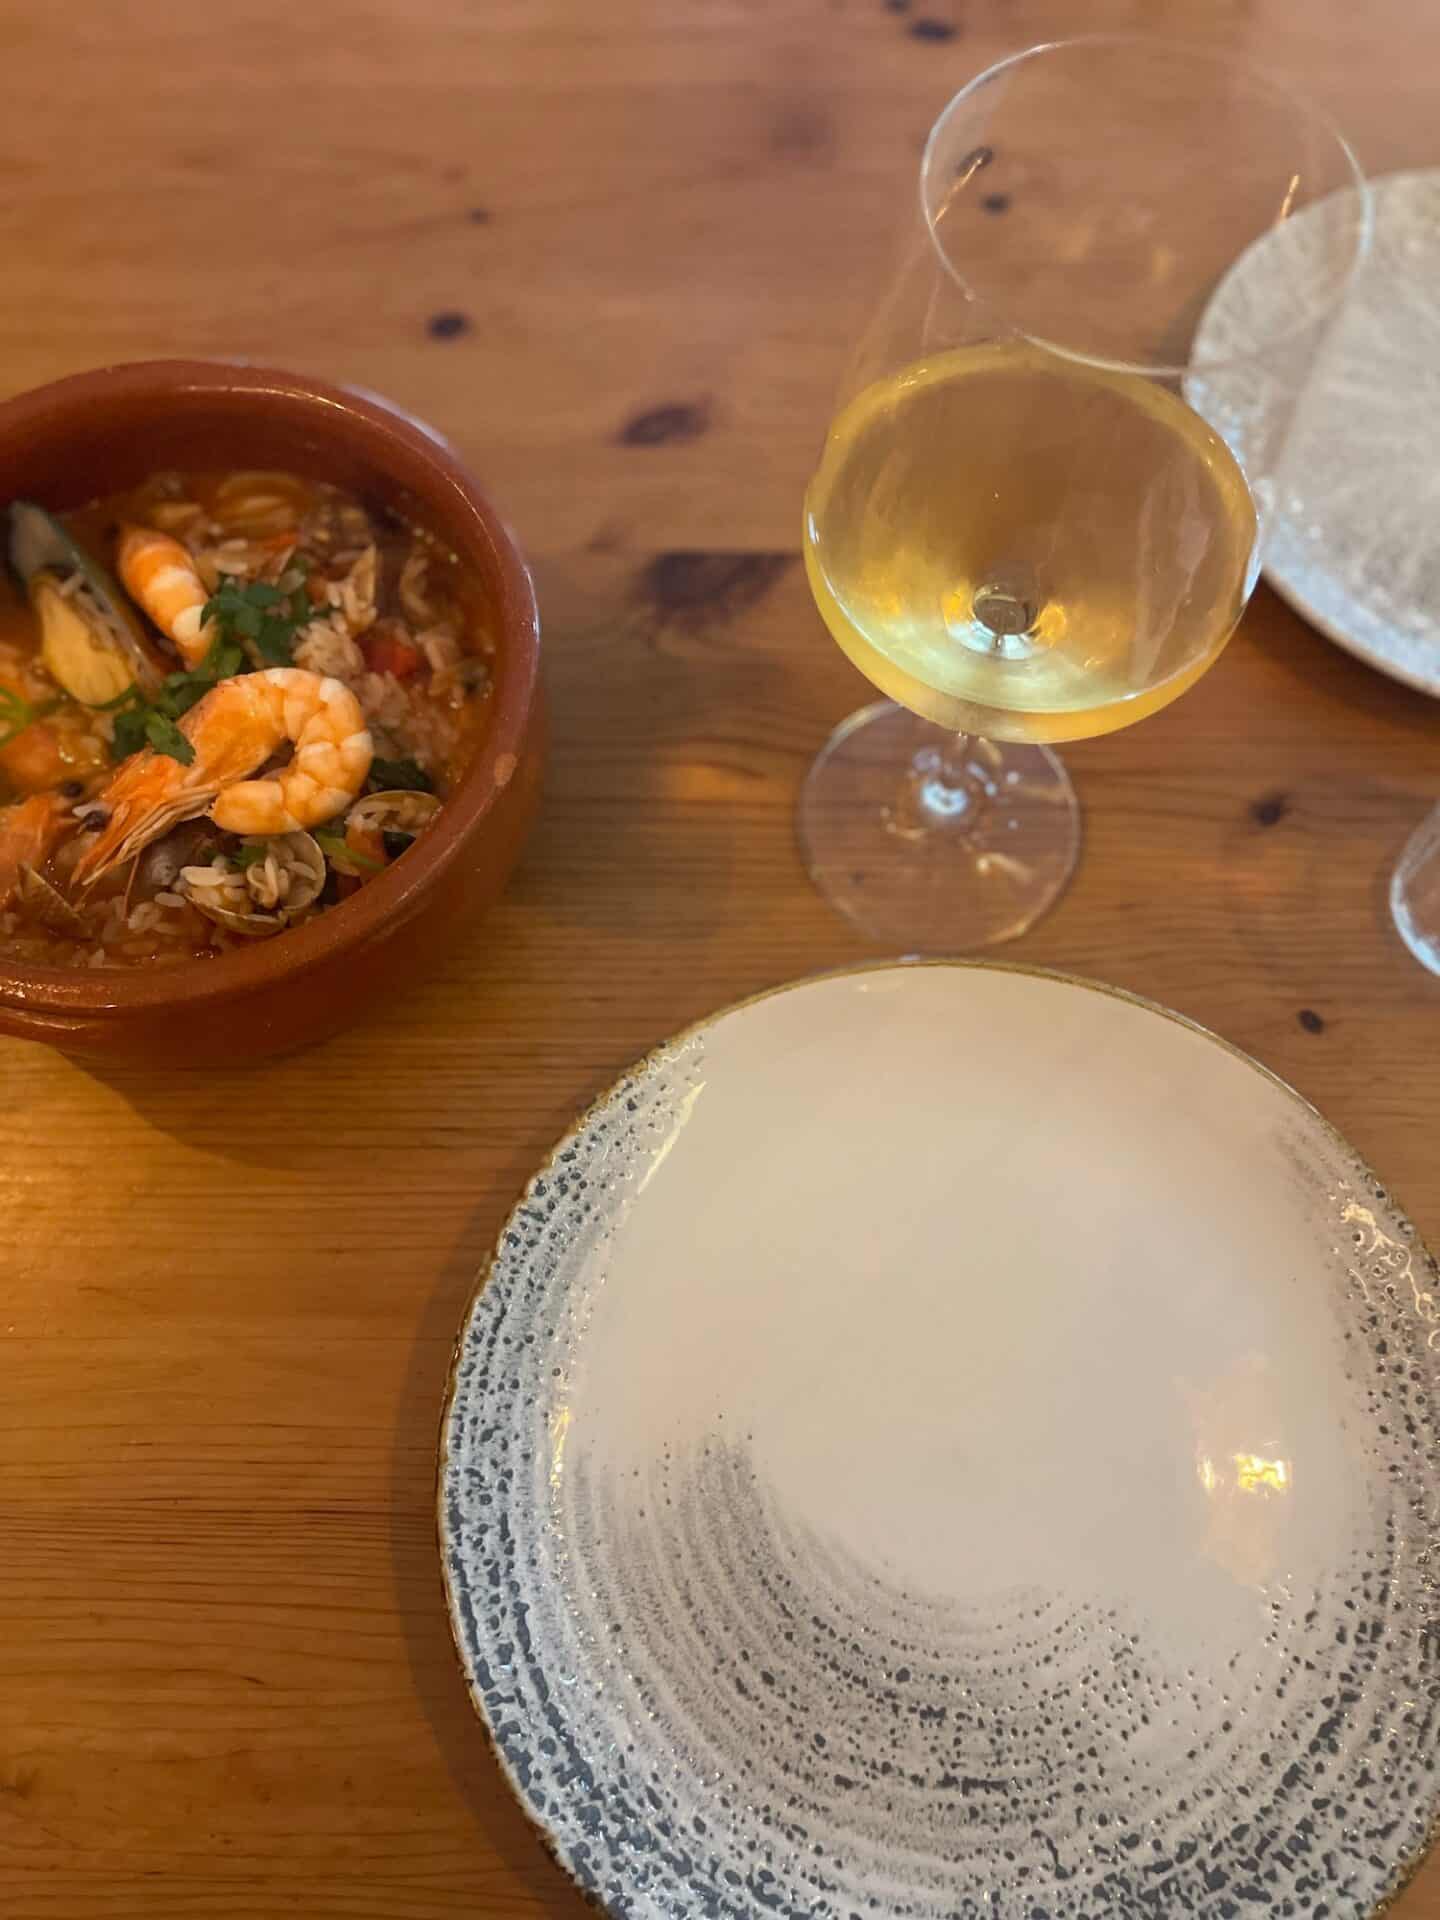 A traditional Portuguese seafood dish served in a terracotta bowl next to a glass of white wine, with an empty decorative plate, on a wooden table, capturing the flavors of Tavira's culinary offerings